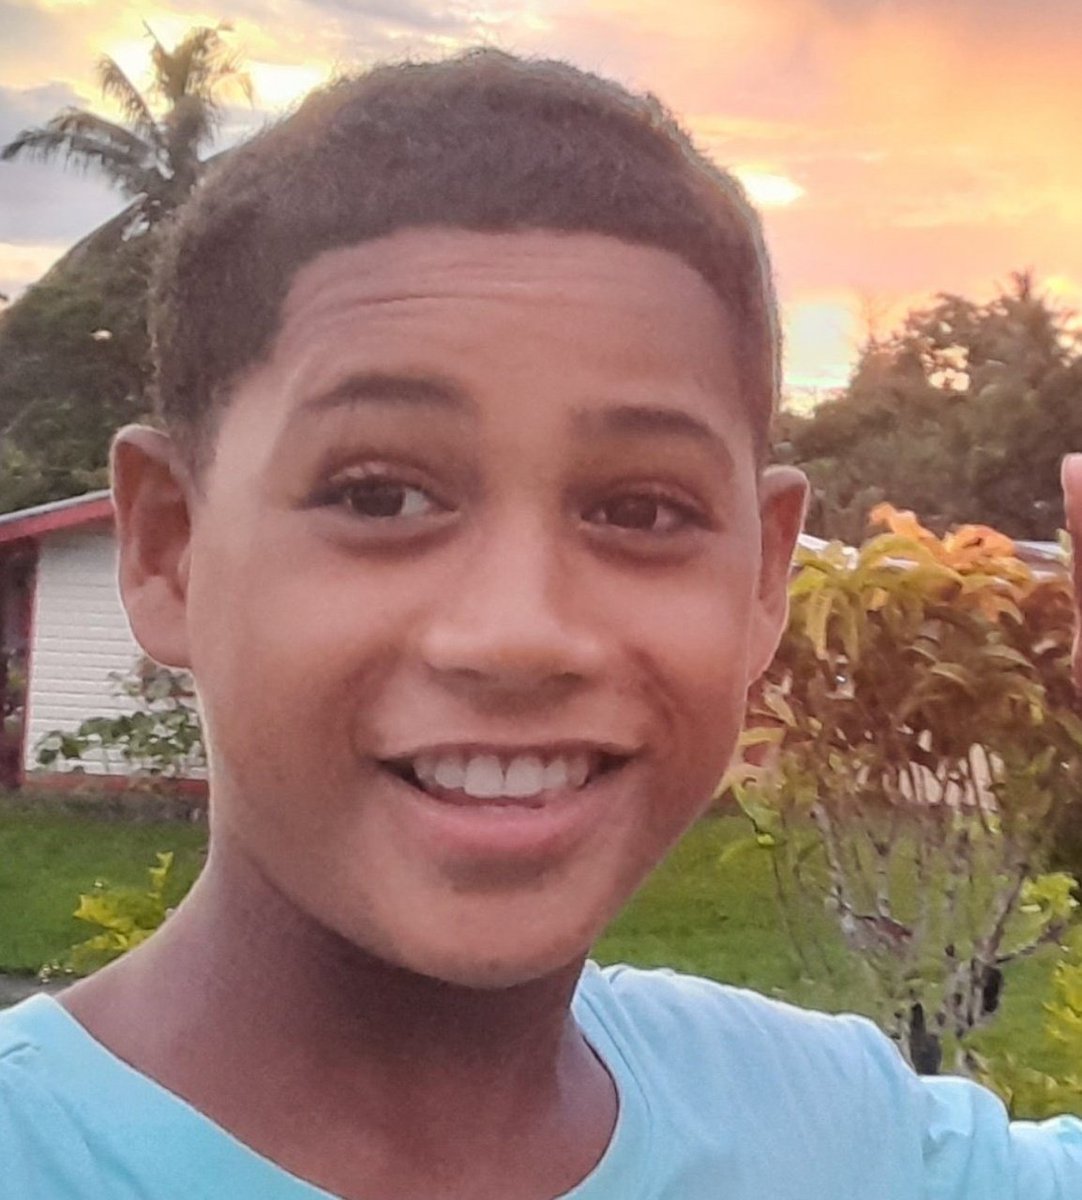 🙏 help us locate 14yr old Sidney Ilaise Tupou Vakalahi, reported missing at the Navua PS. He was last seen on the 21st of April at a relatives' home in Ravodrau. Please 📞 Crime Stoppers on 919 or the Southern Division Command Center on 9905529 if you have any information.